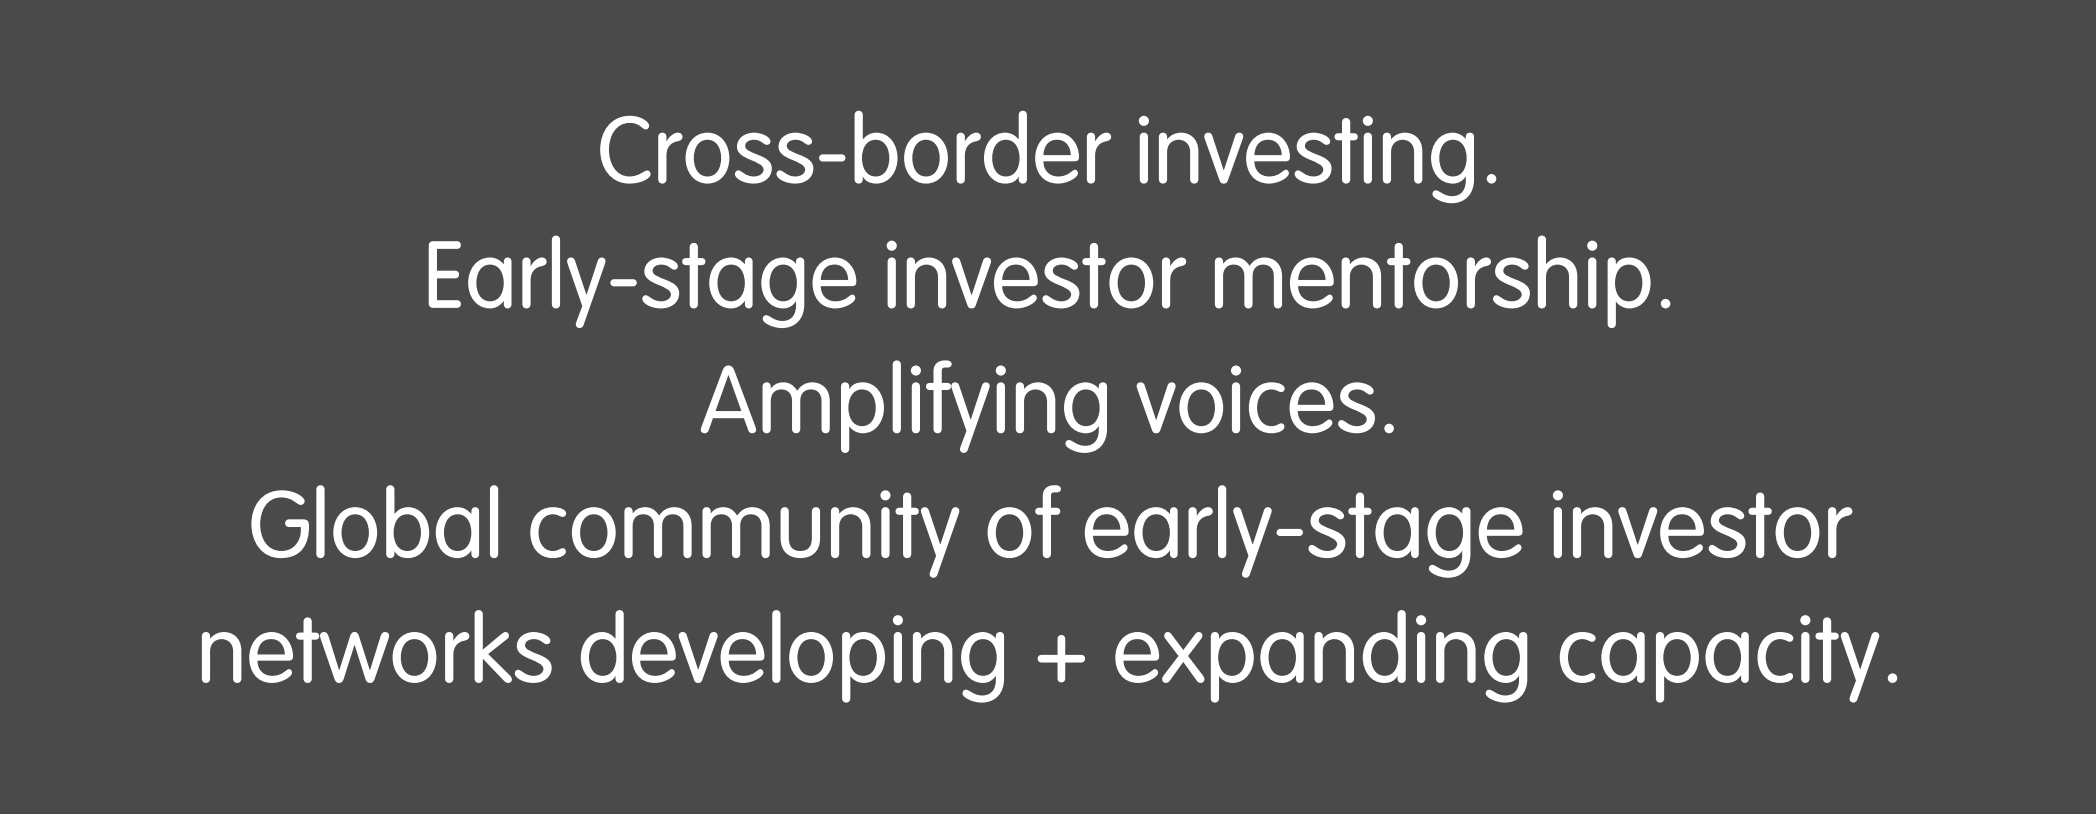 ross-border investing. Early-stage investor mentorship. Amplifying voices.   Global community of early-stage investor networks developing + expanding capacity. 